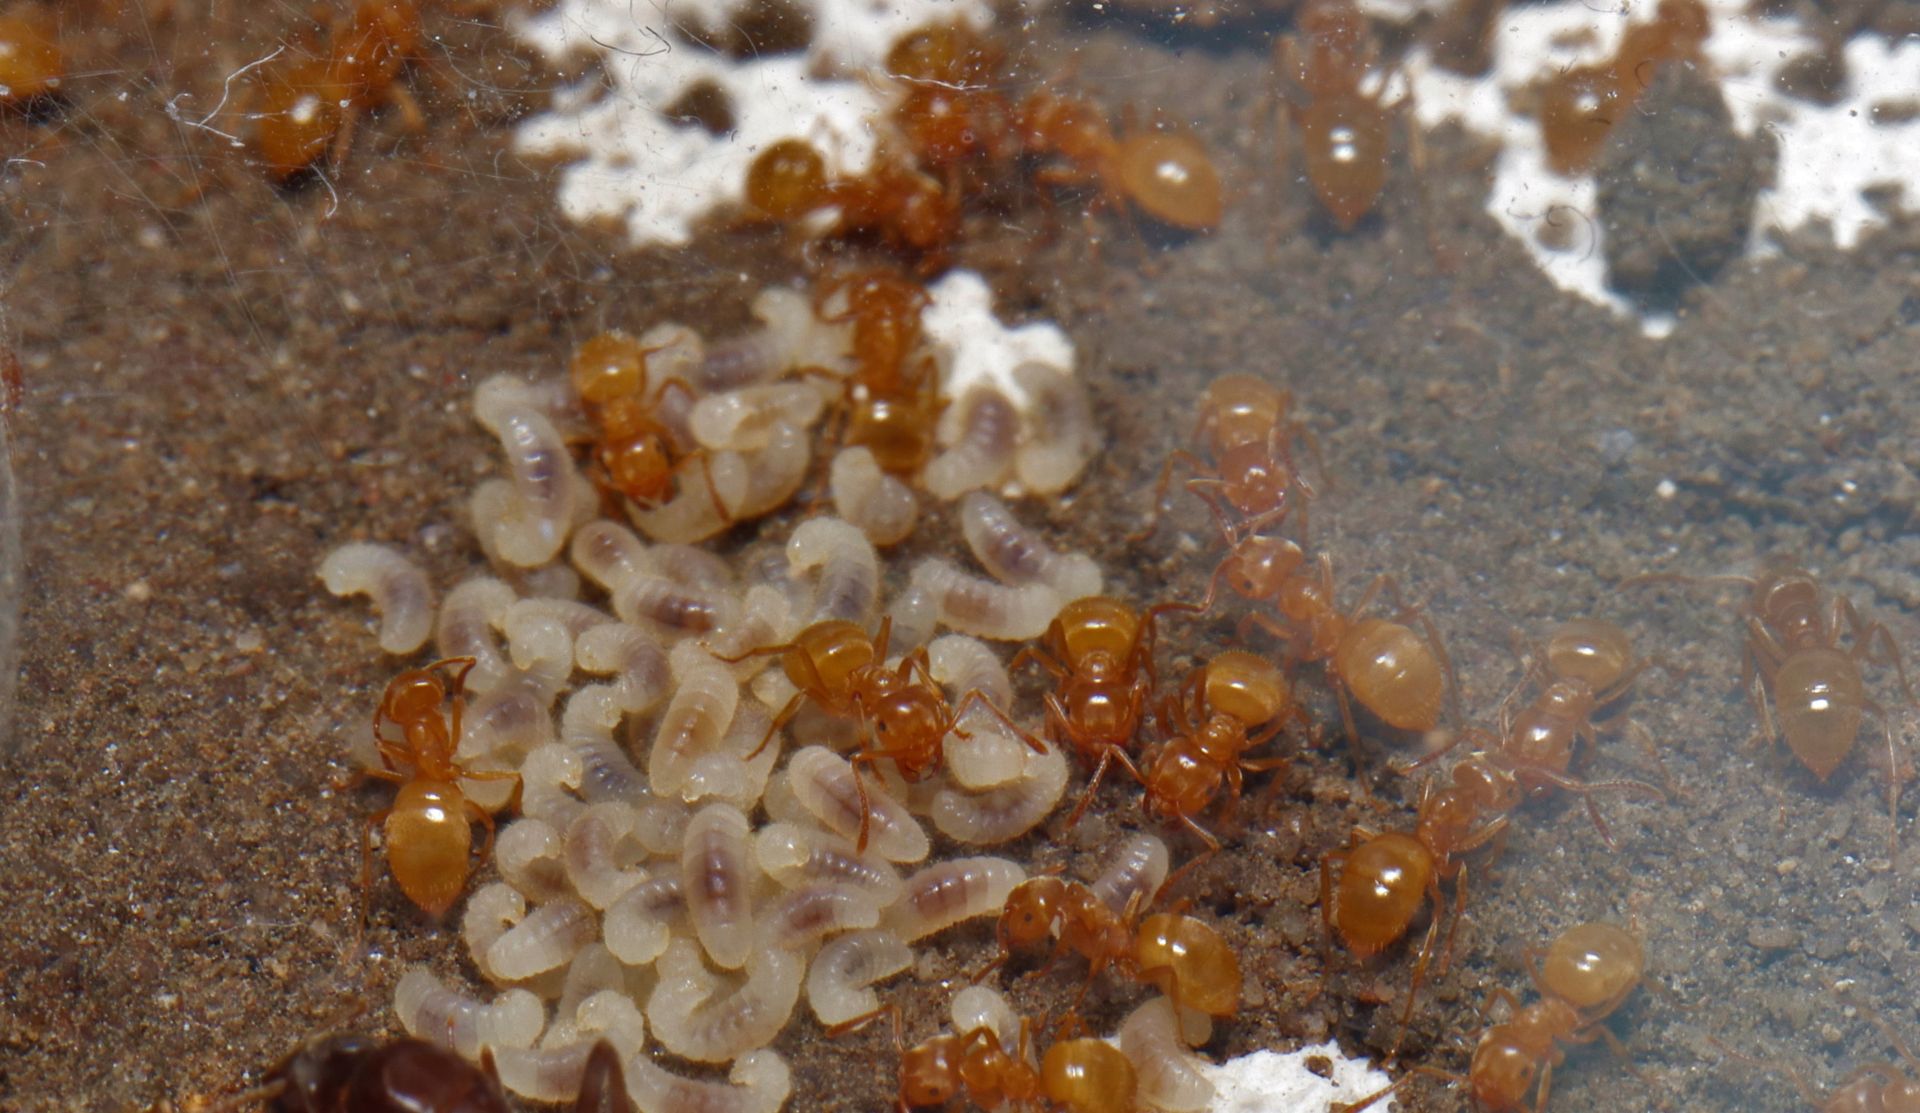 Lasius umbratus queen with workers and breed